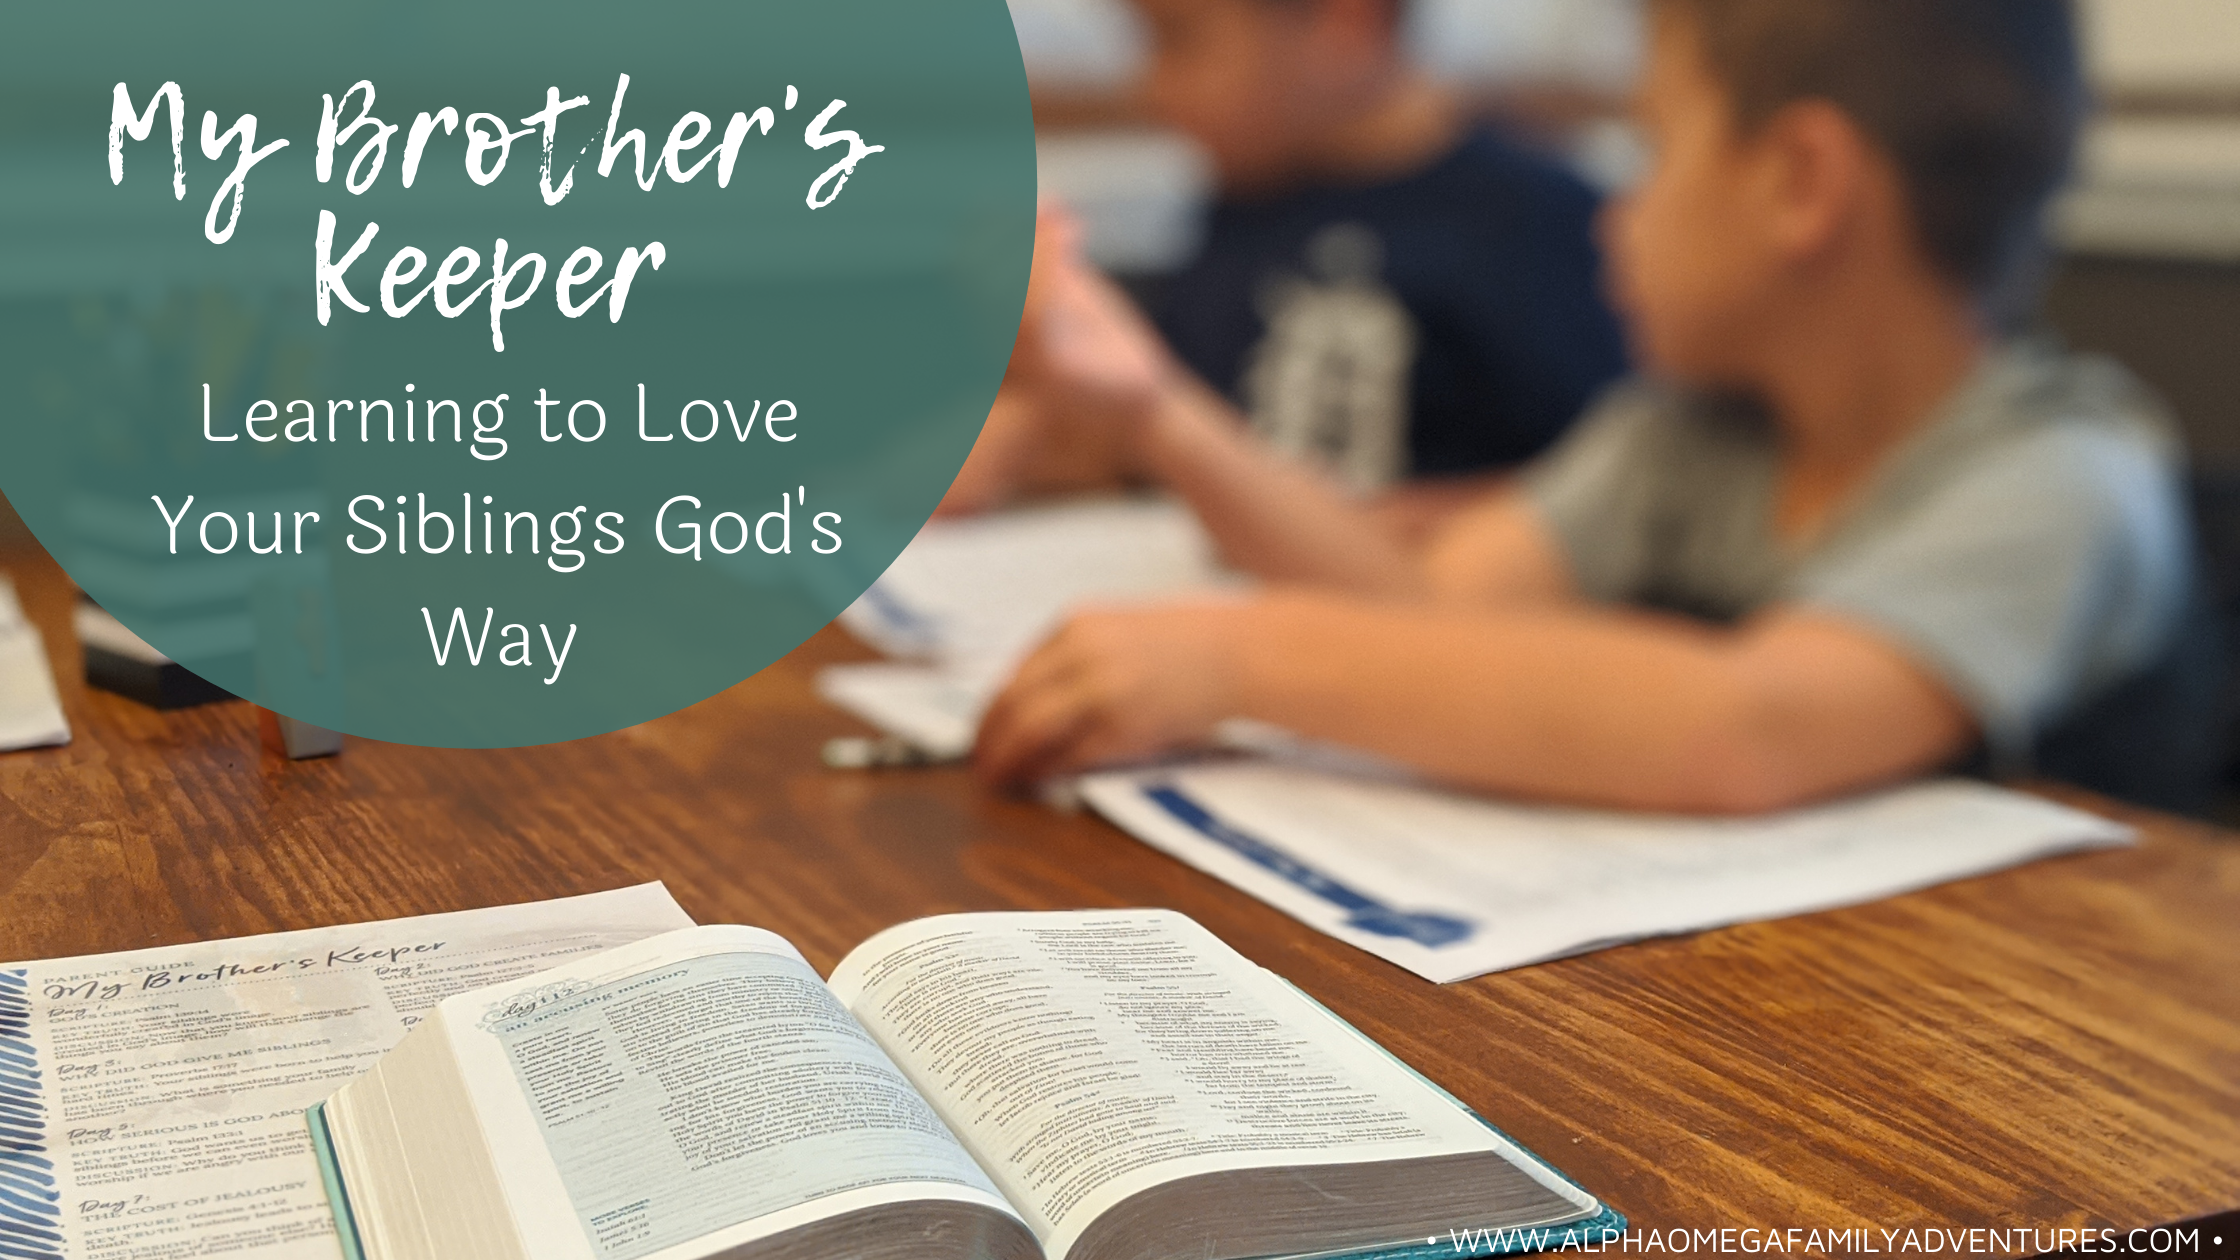 Helping Our Boys Learn to Love Each Other More Through the My Brother’s Keeper Siblings Bible Study